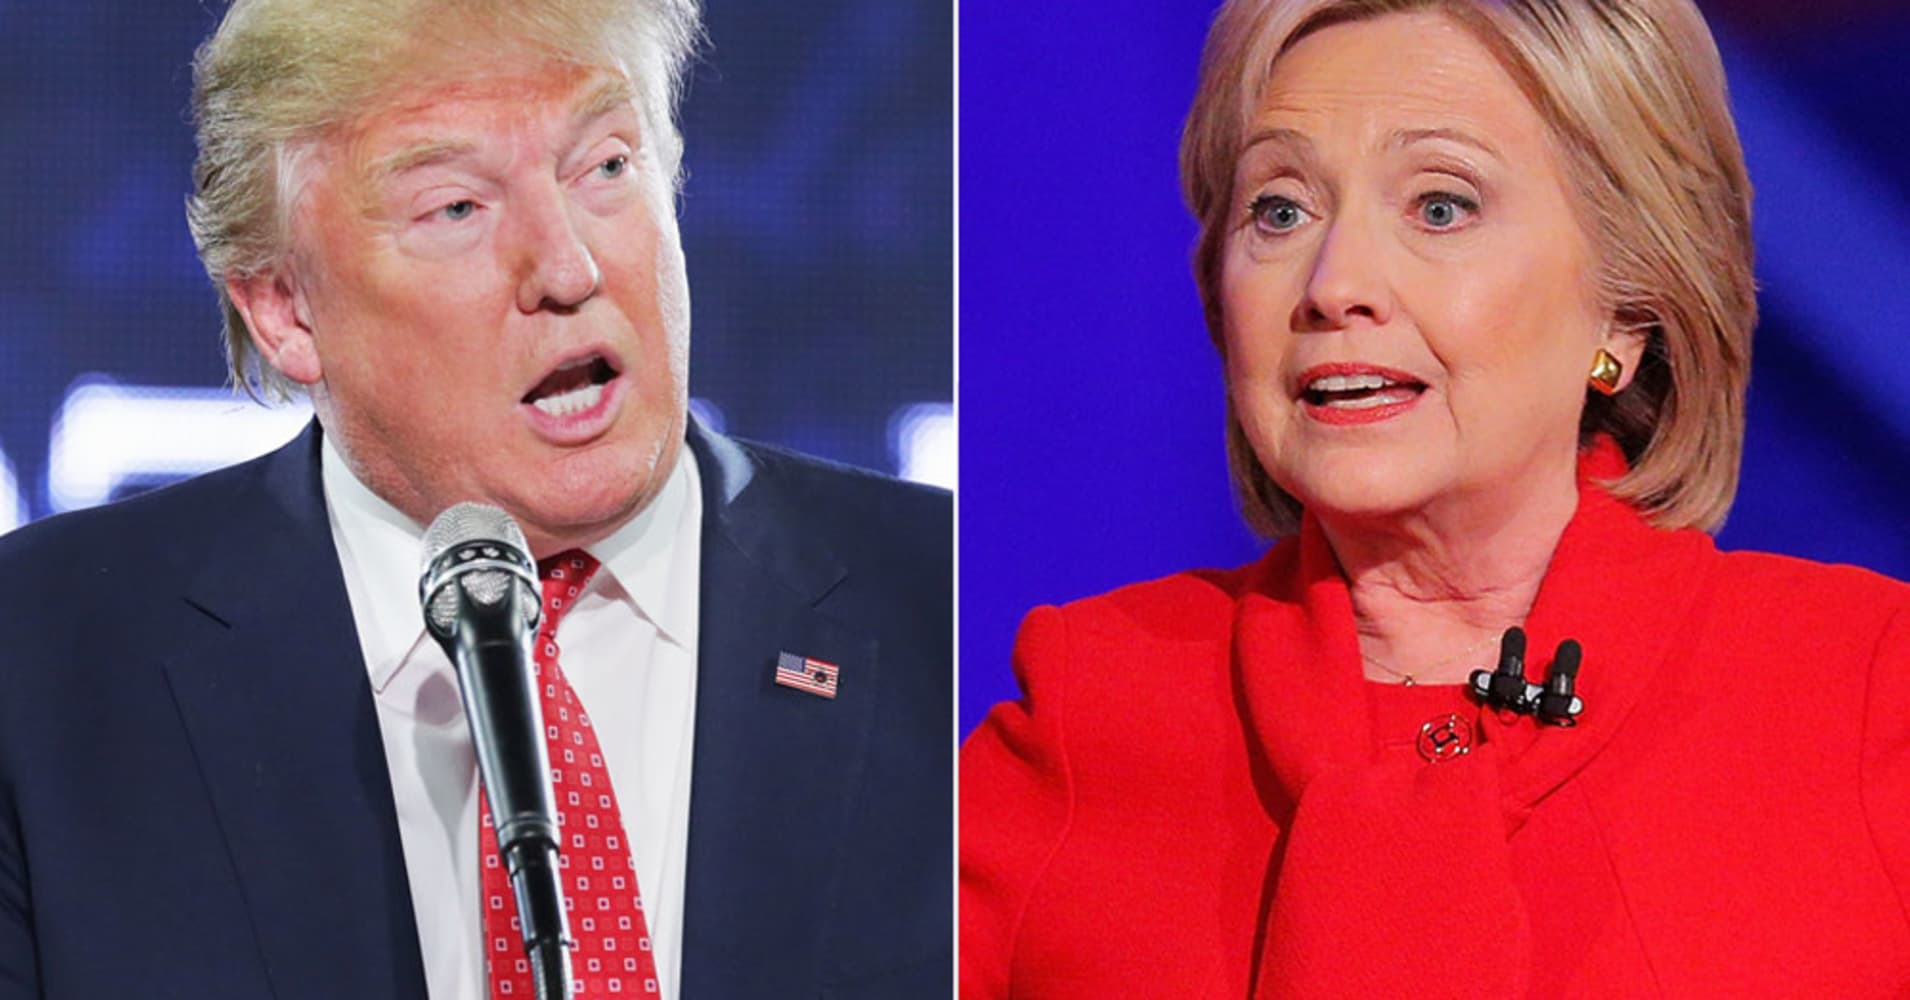 Donald Trump Vs Hillary Clinton The Candidate Who Stinks Less